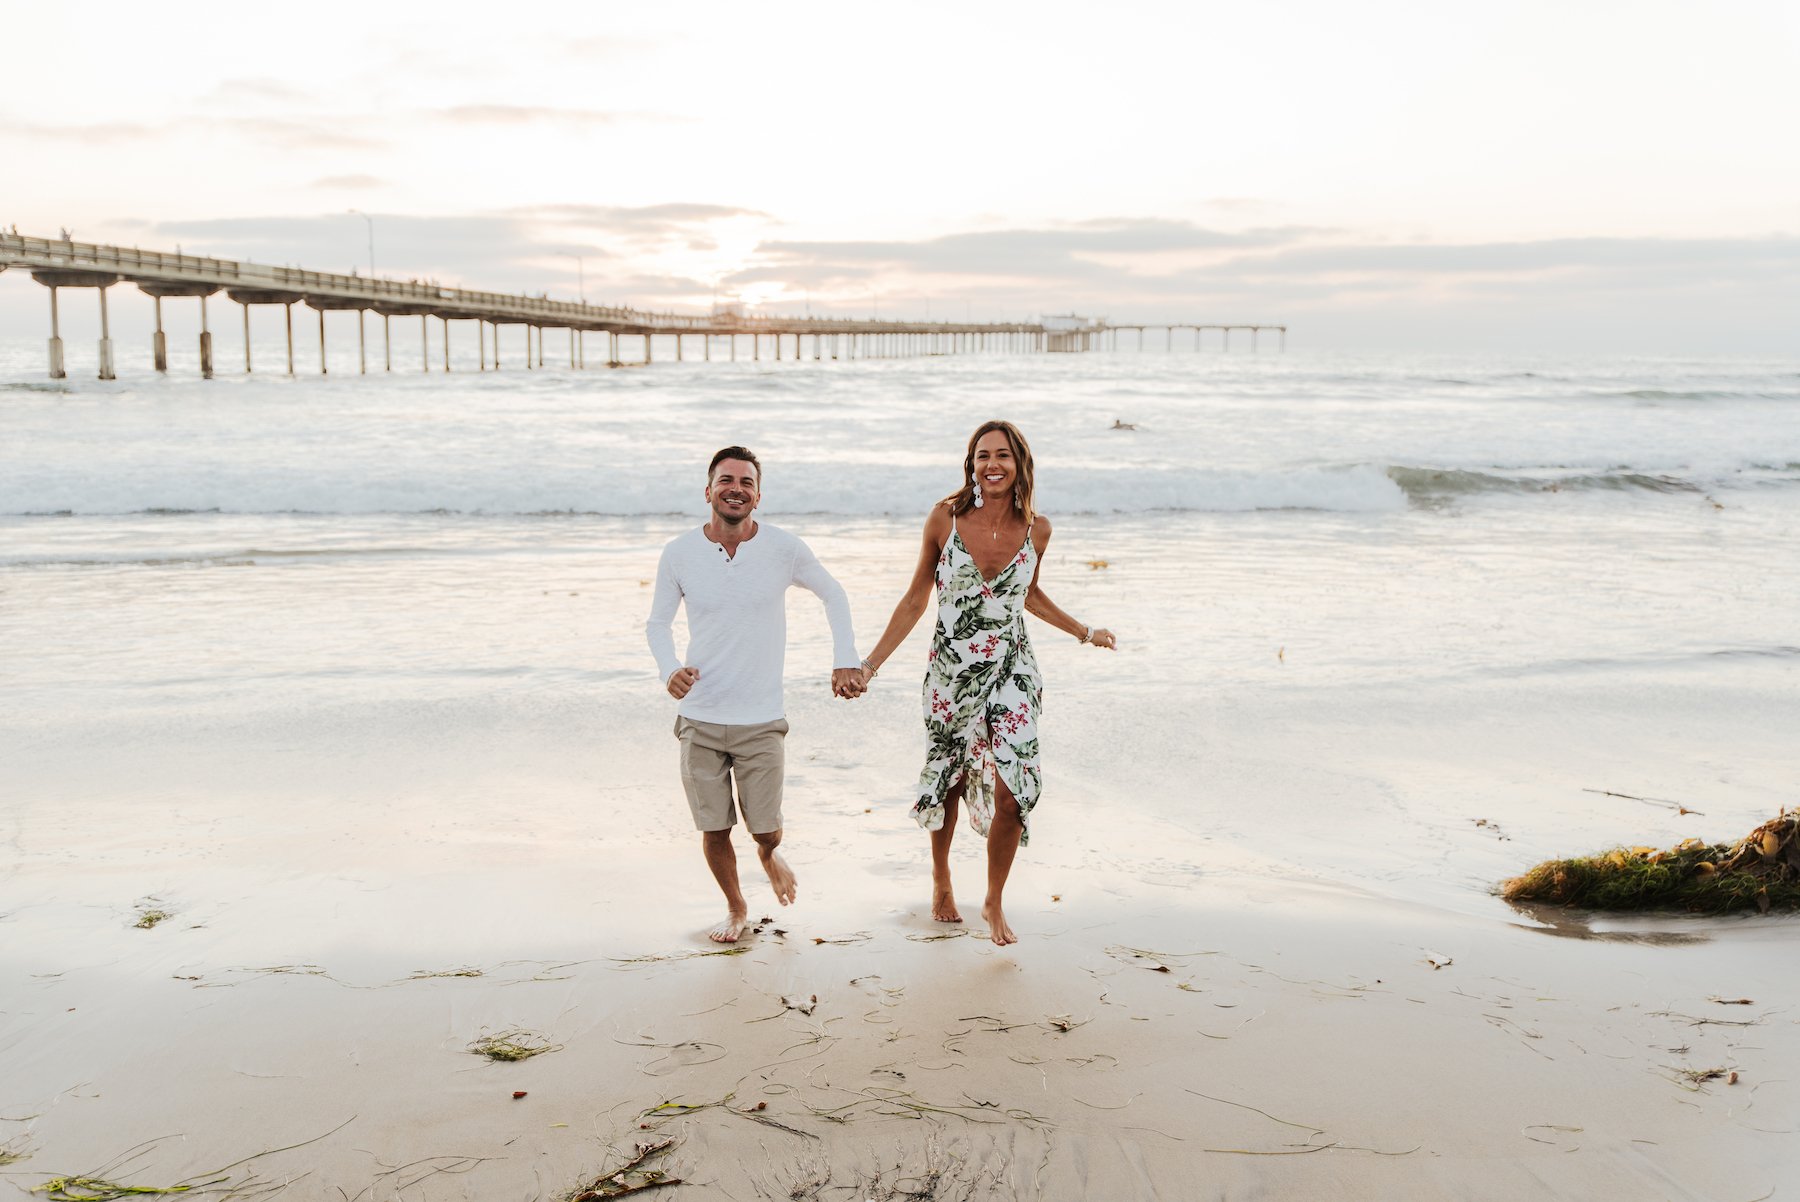 Top 8 Places to Take Photos in San Diego | Flytographer